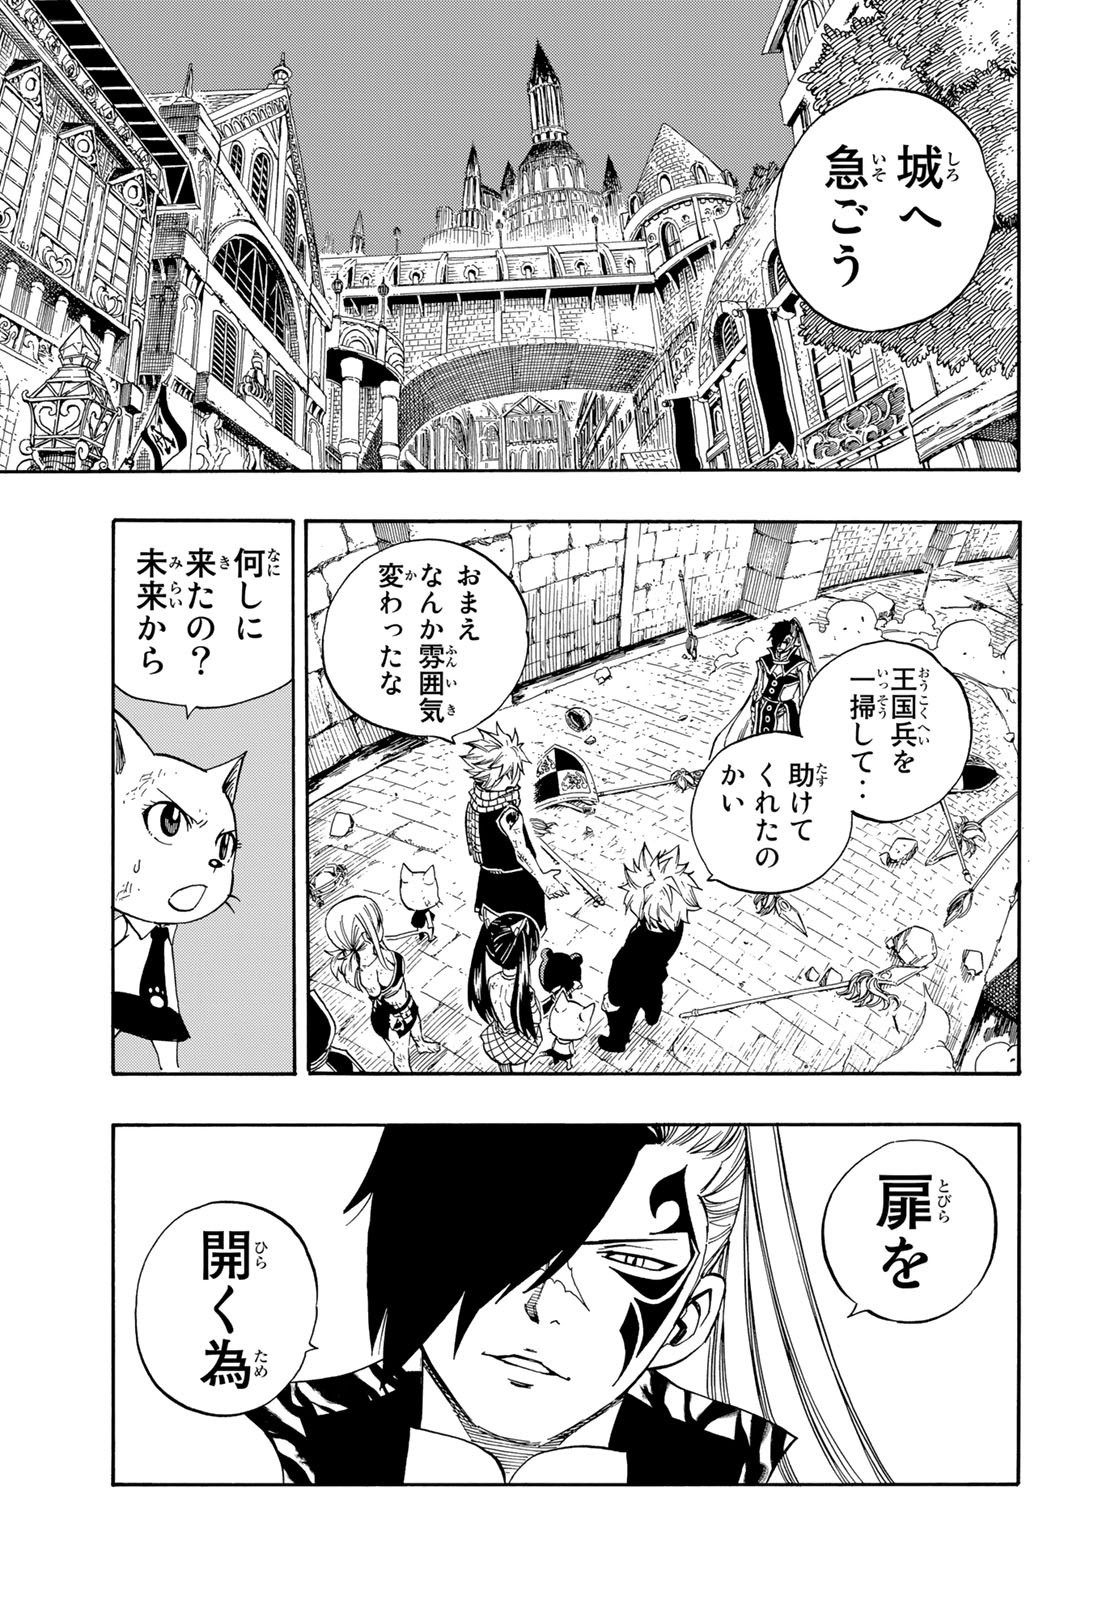 Weekly Shōnen Magazine - 週刊少年マガジン - Chapter 2024-28 - Page 466